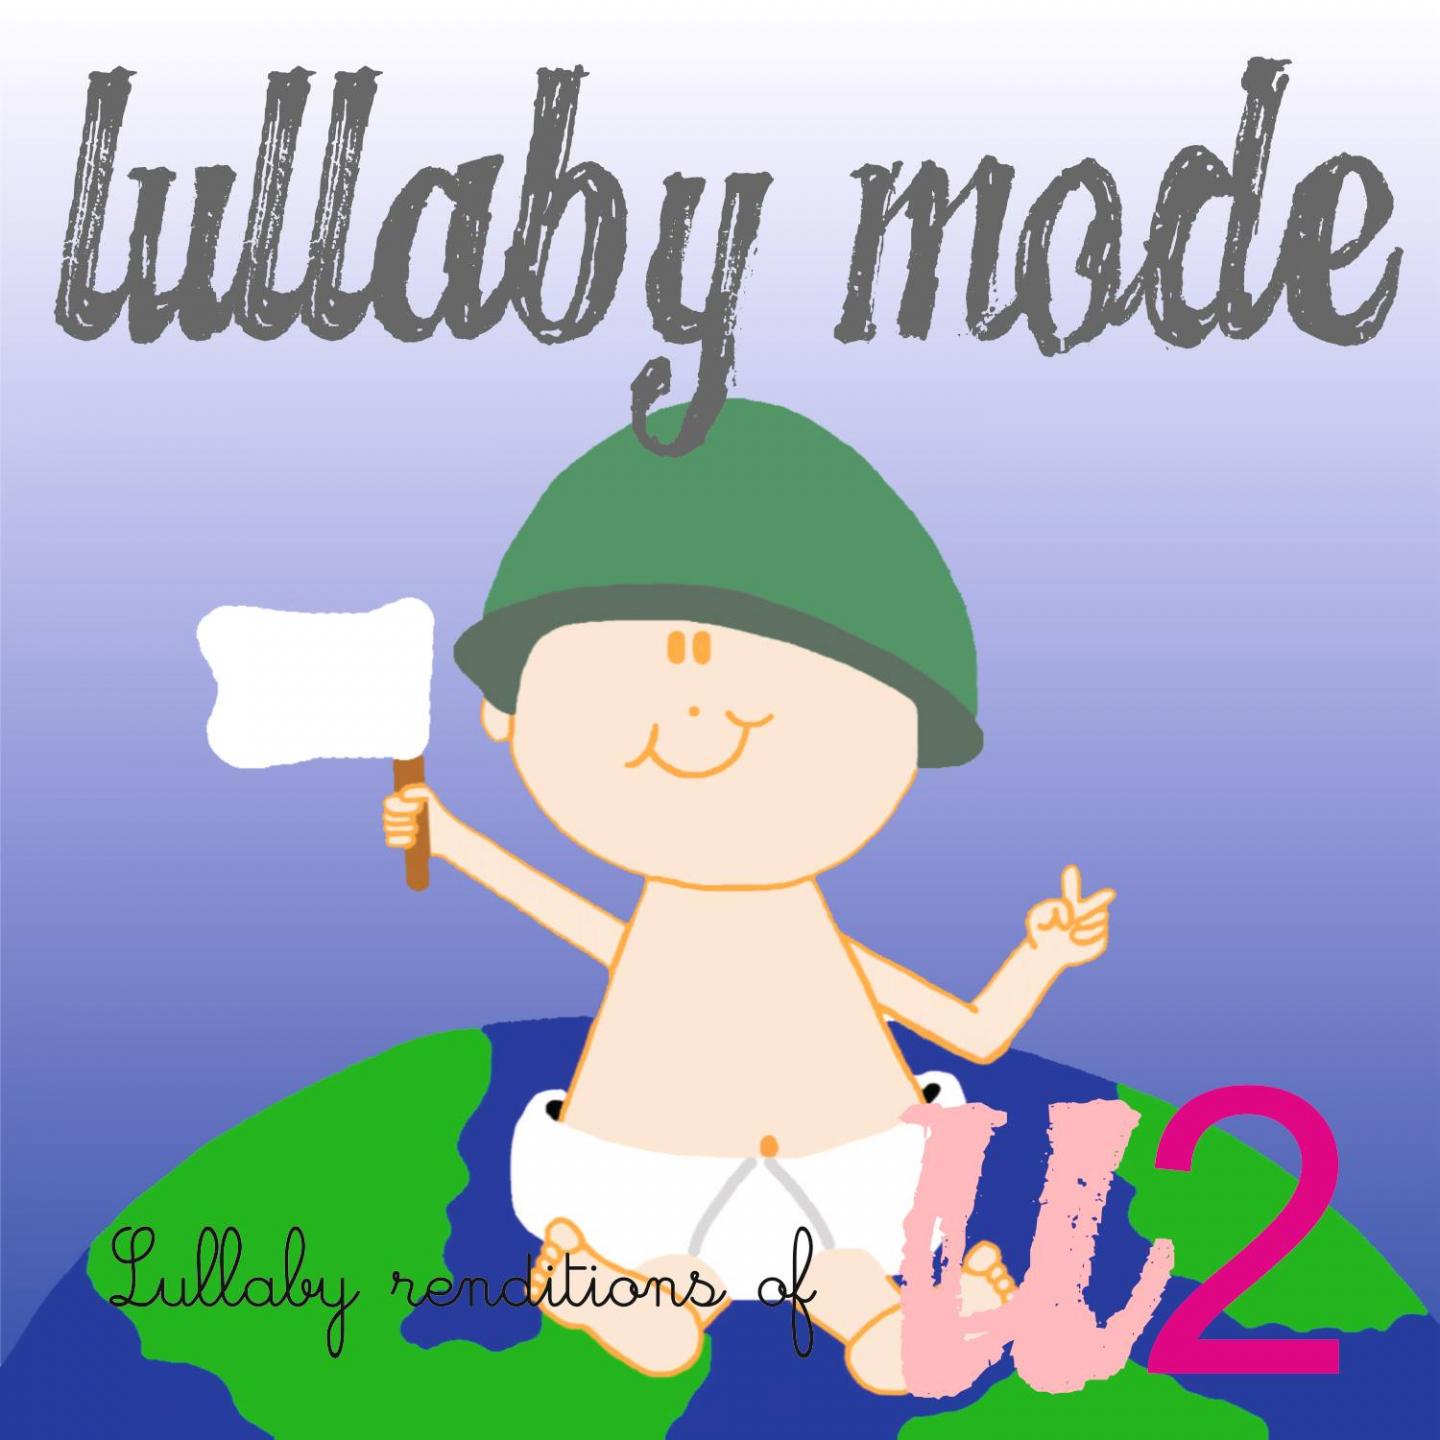 Lullaby Renditions of U2